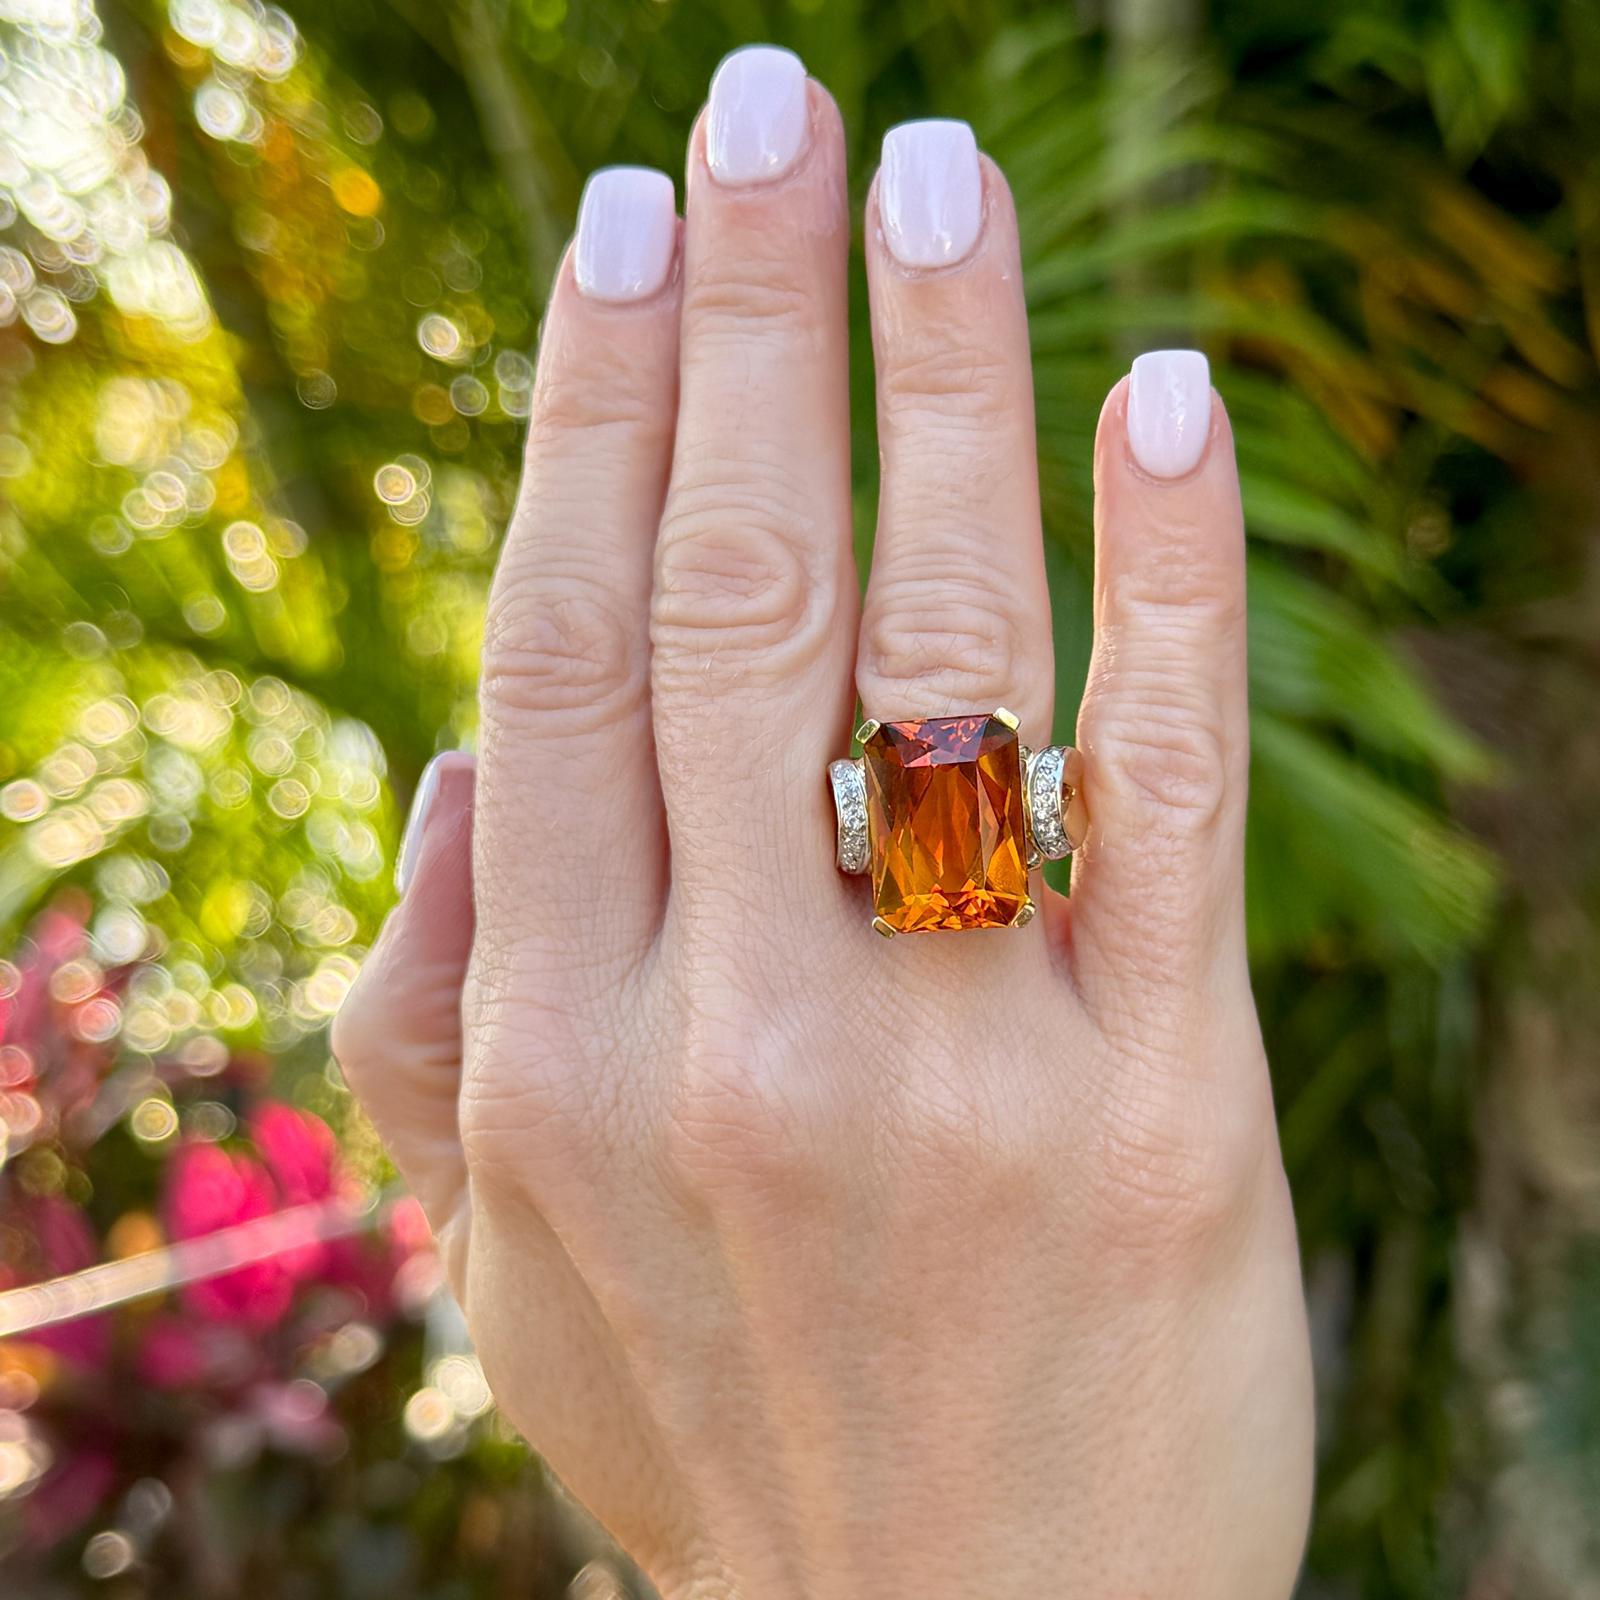 The centerpiece of ths ring is a stunning 15 carat honey citrine gemstone. Honey citrine, with its warm, golden-yellow hue reminiscent of honey, is both striking and elegant. The 10 single cut diamonds are set as accents on the sides weighing